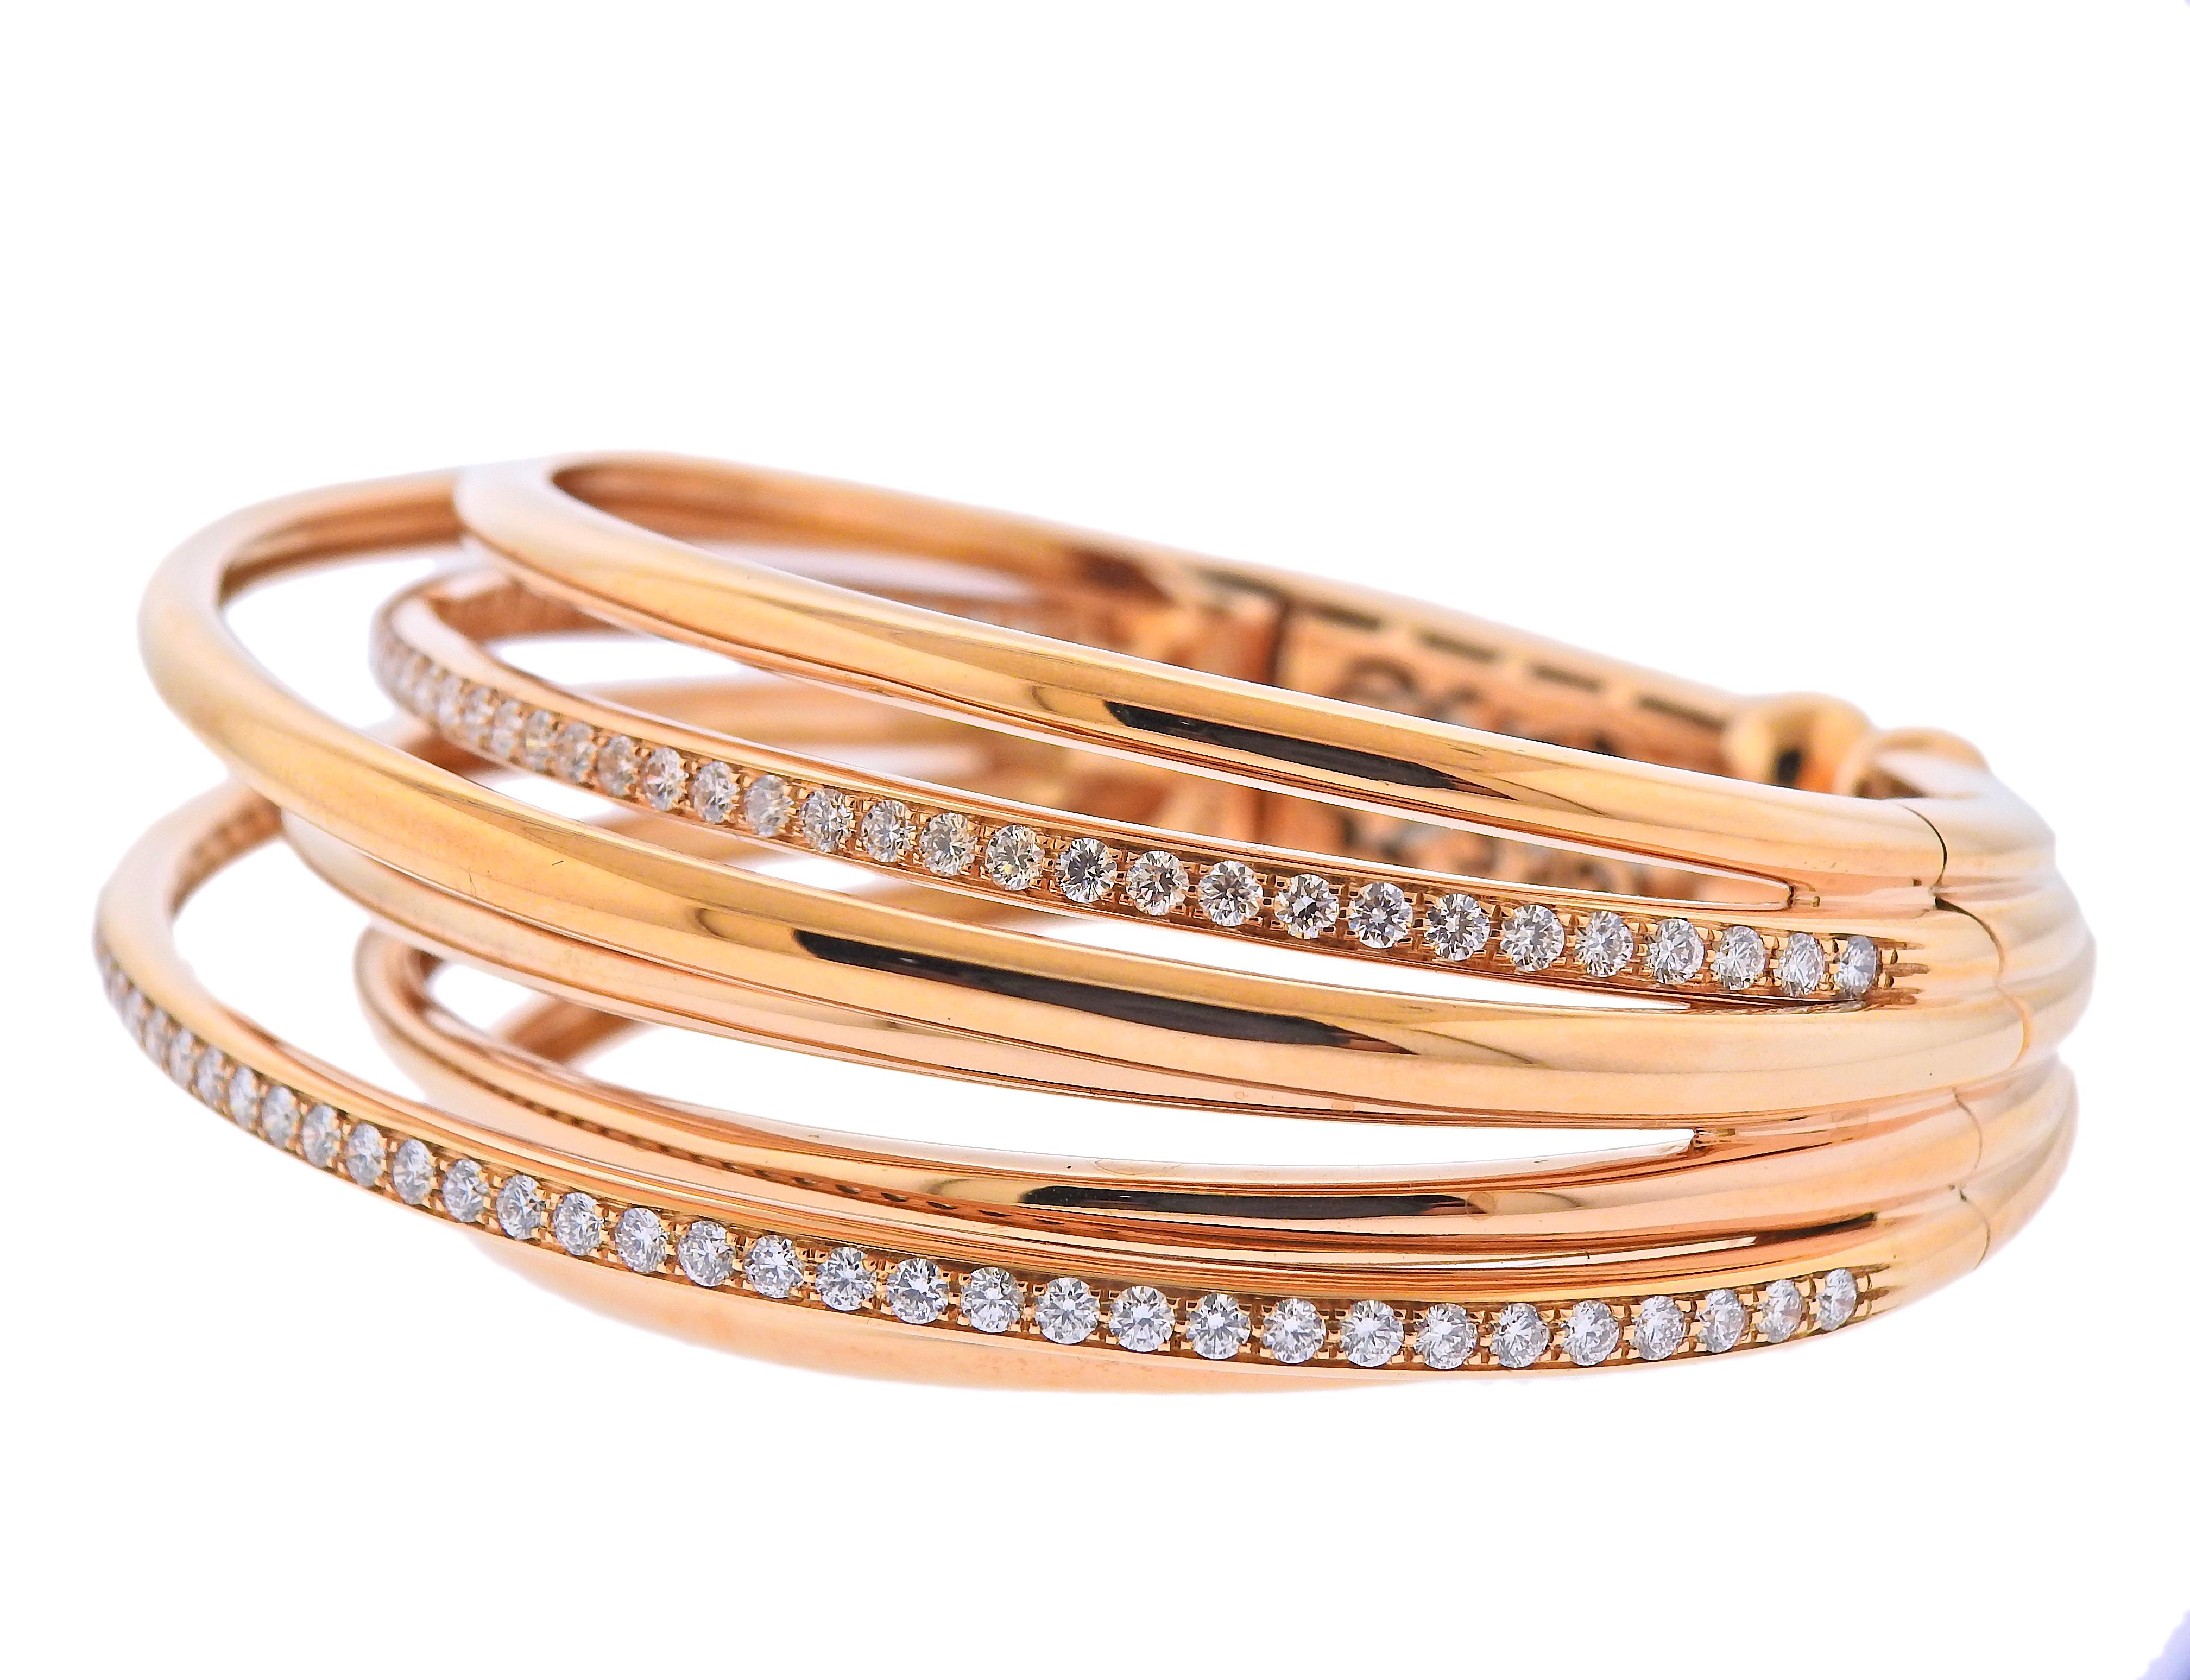 Brand new 18k rose gold bracelet by De Grisogono. Set with 3.95ctw in VVS F/G diamonds. Will comfortably fit up to 7 1/2